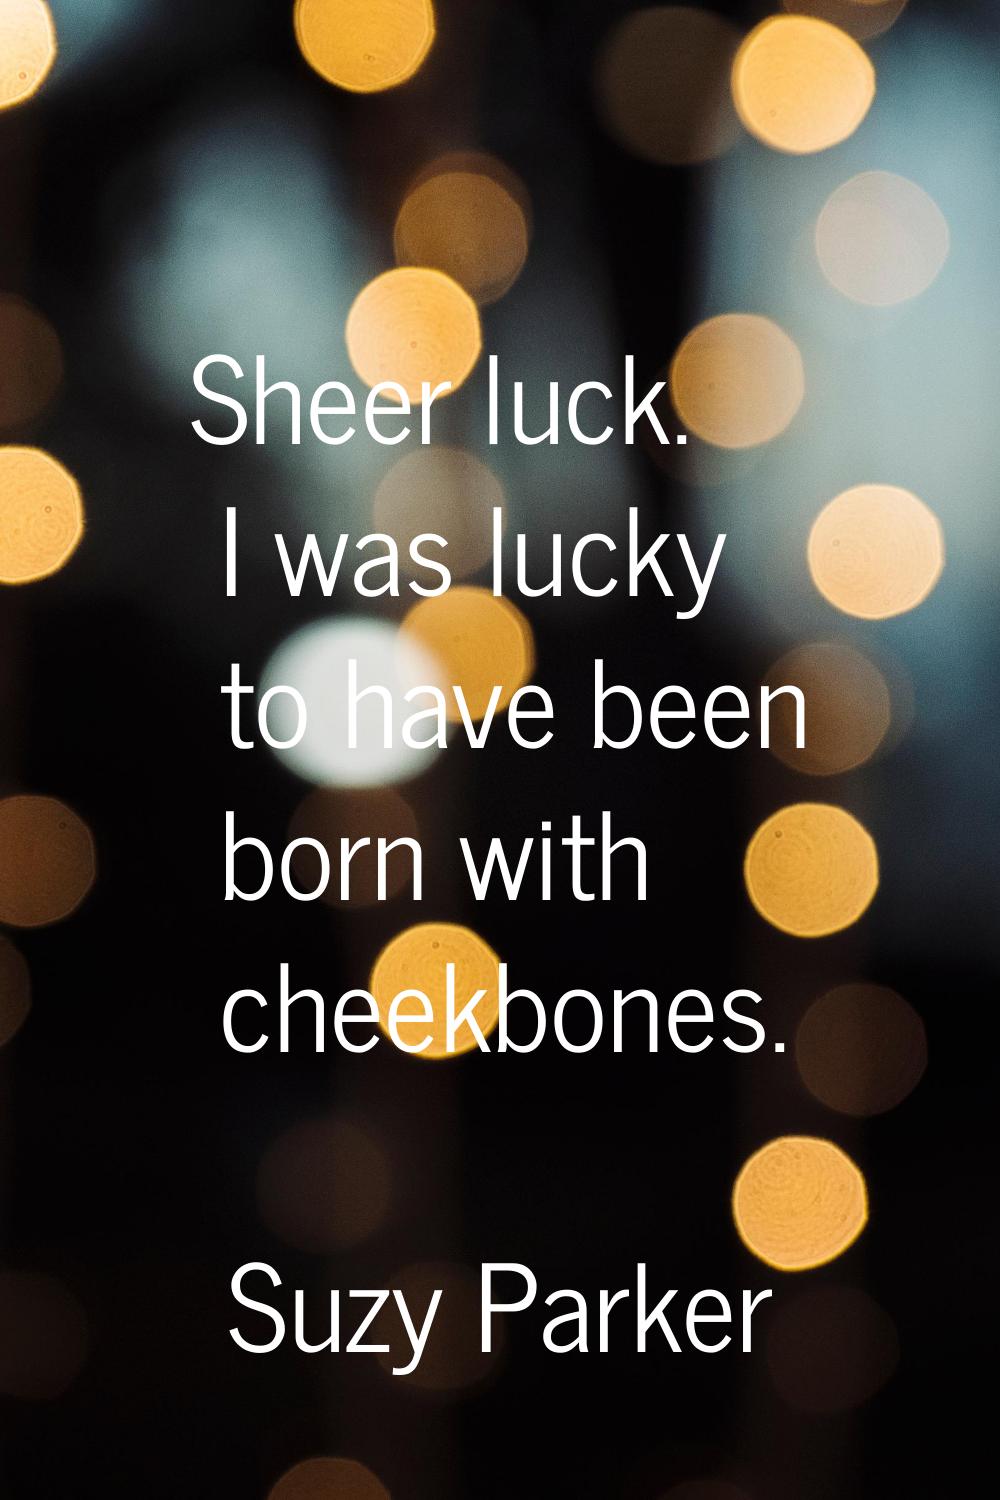 Sheer luck. I was lucky to have been born with cheekbones.